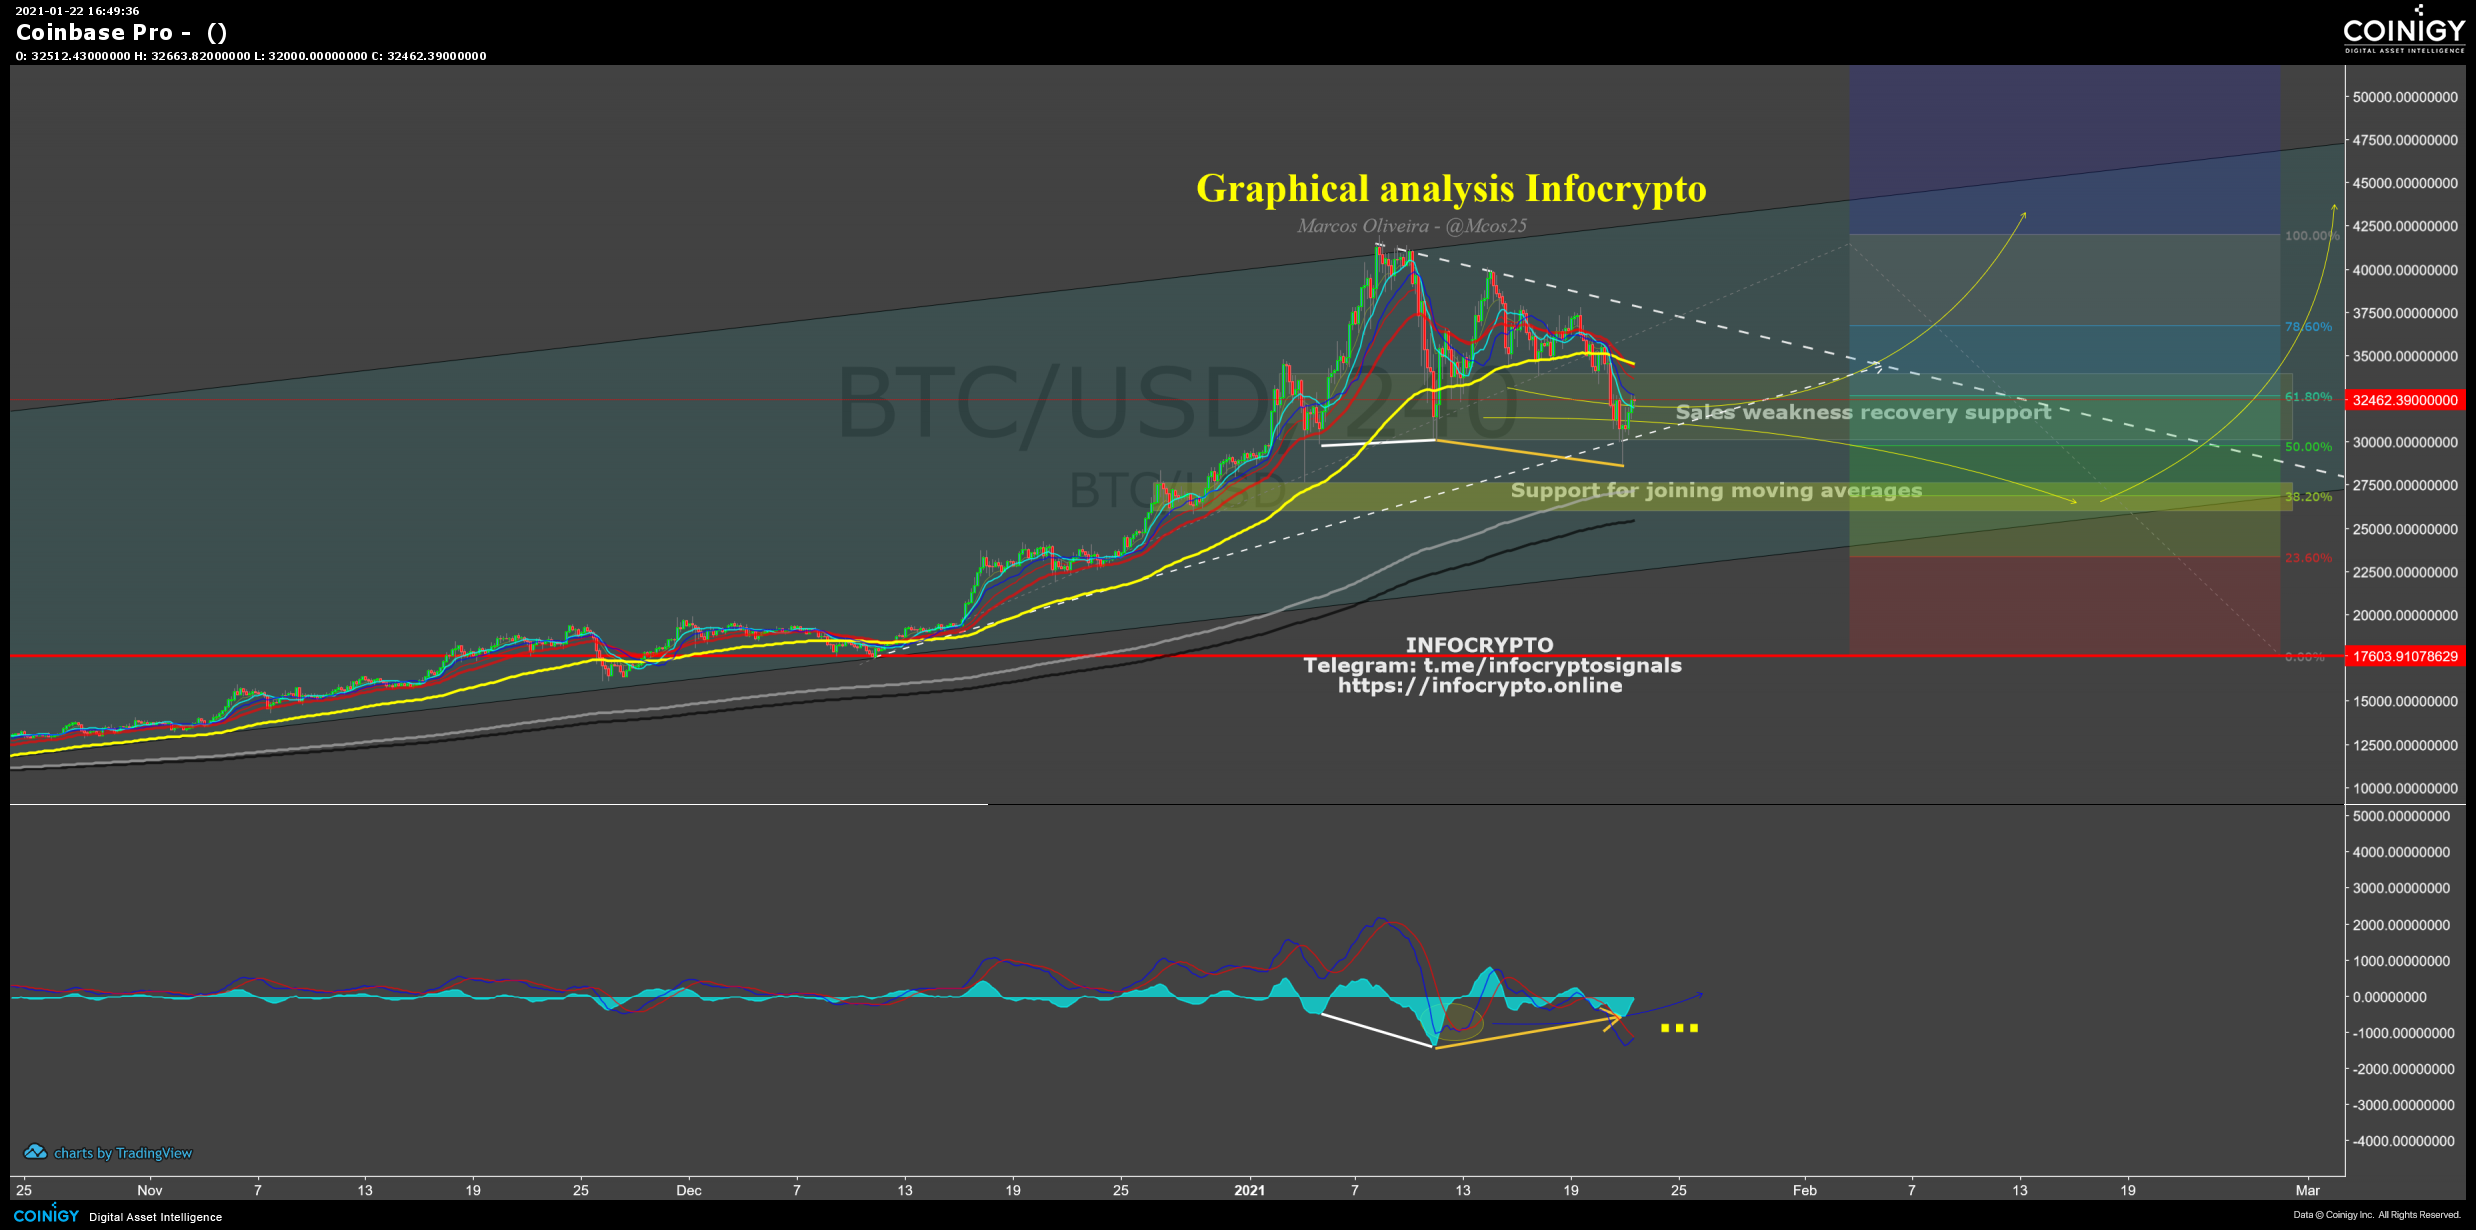 Coinbase Pro Chart - Published on Coinigy.com on January ...